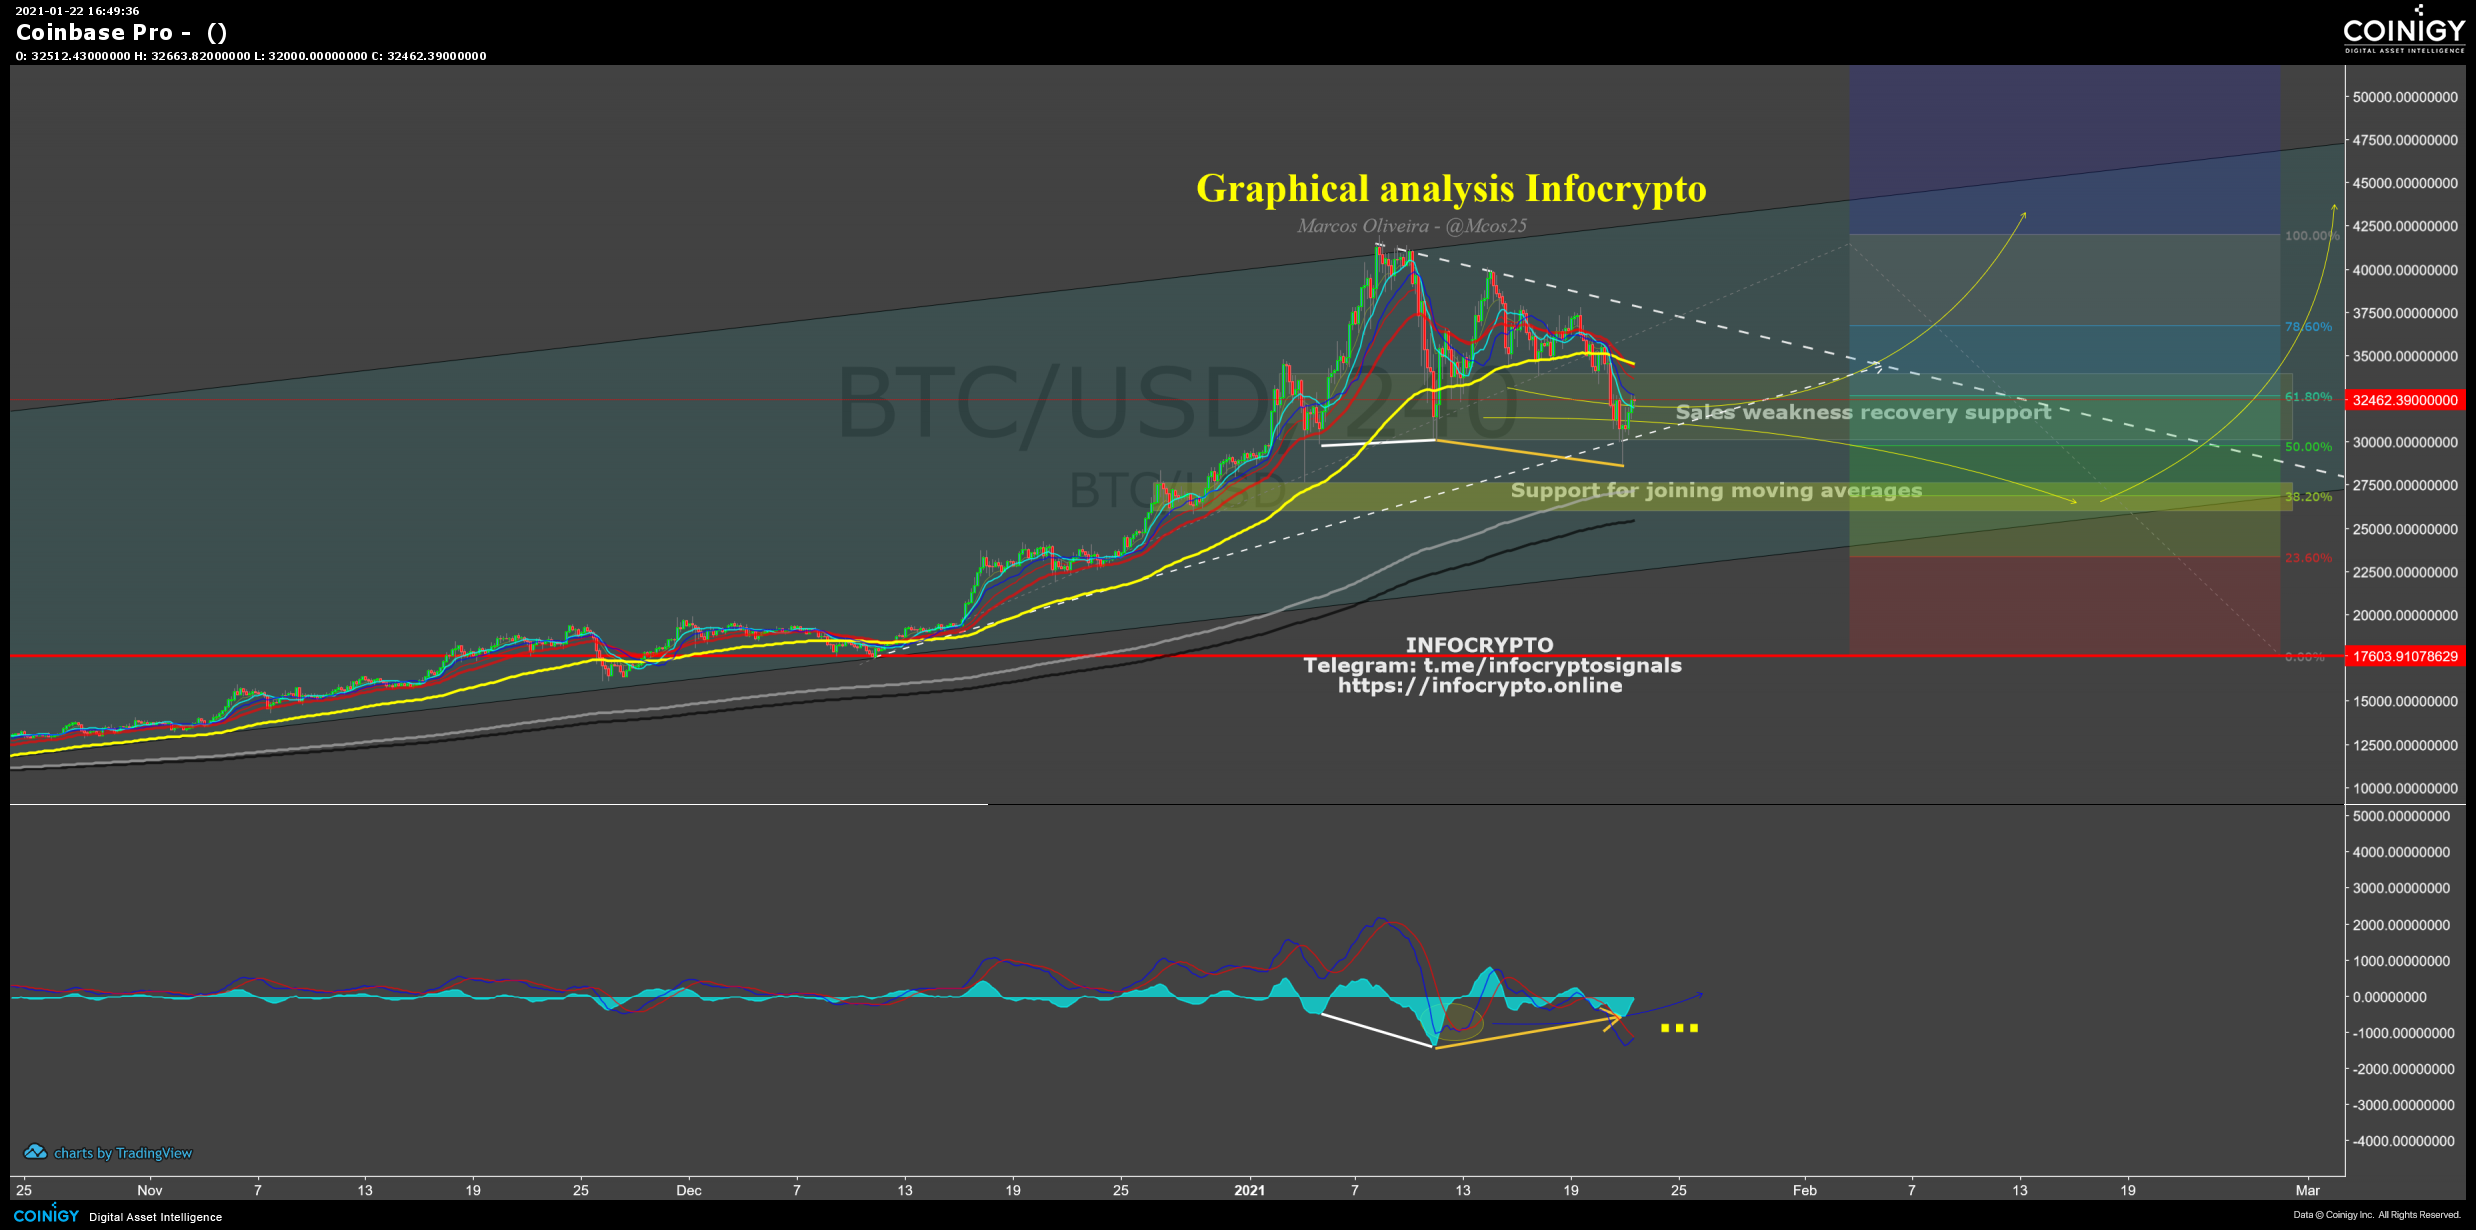 Coinbase Pro Chart - Published on Coinigy.com on January ...